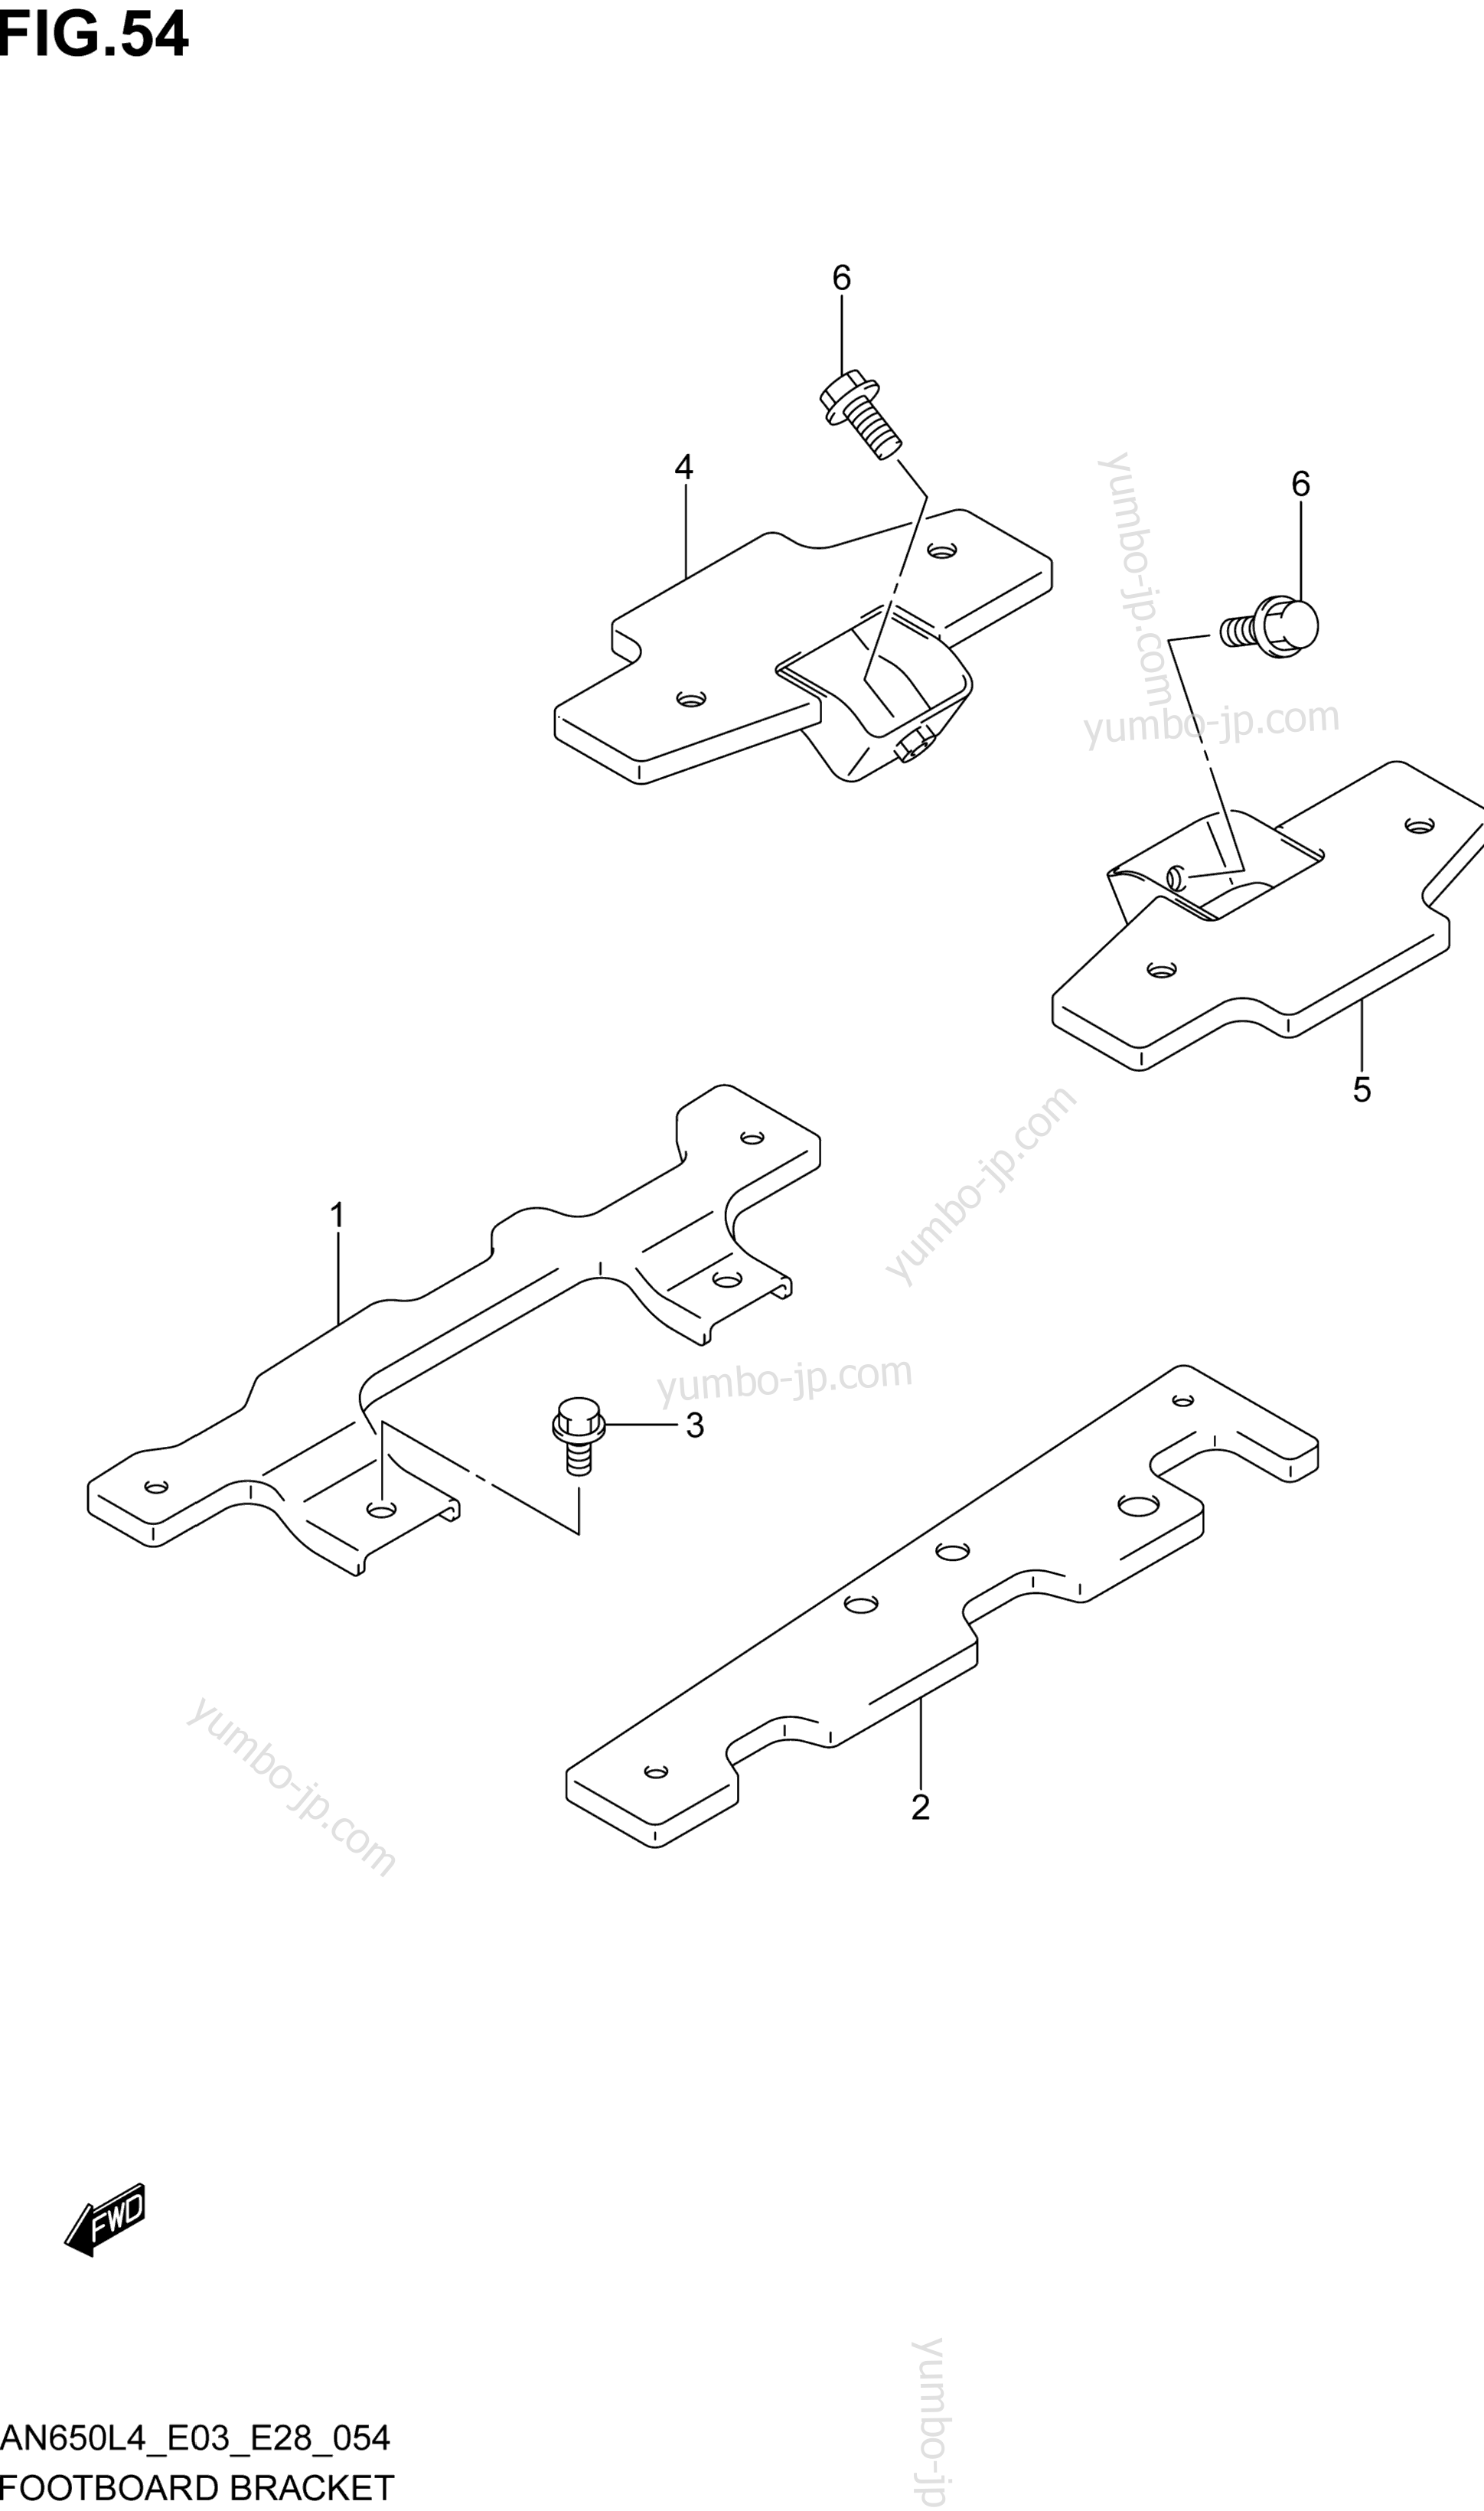 FOOTBOARD BRACKET for scooters SUZUKI AN650 2014 year